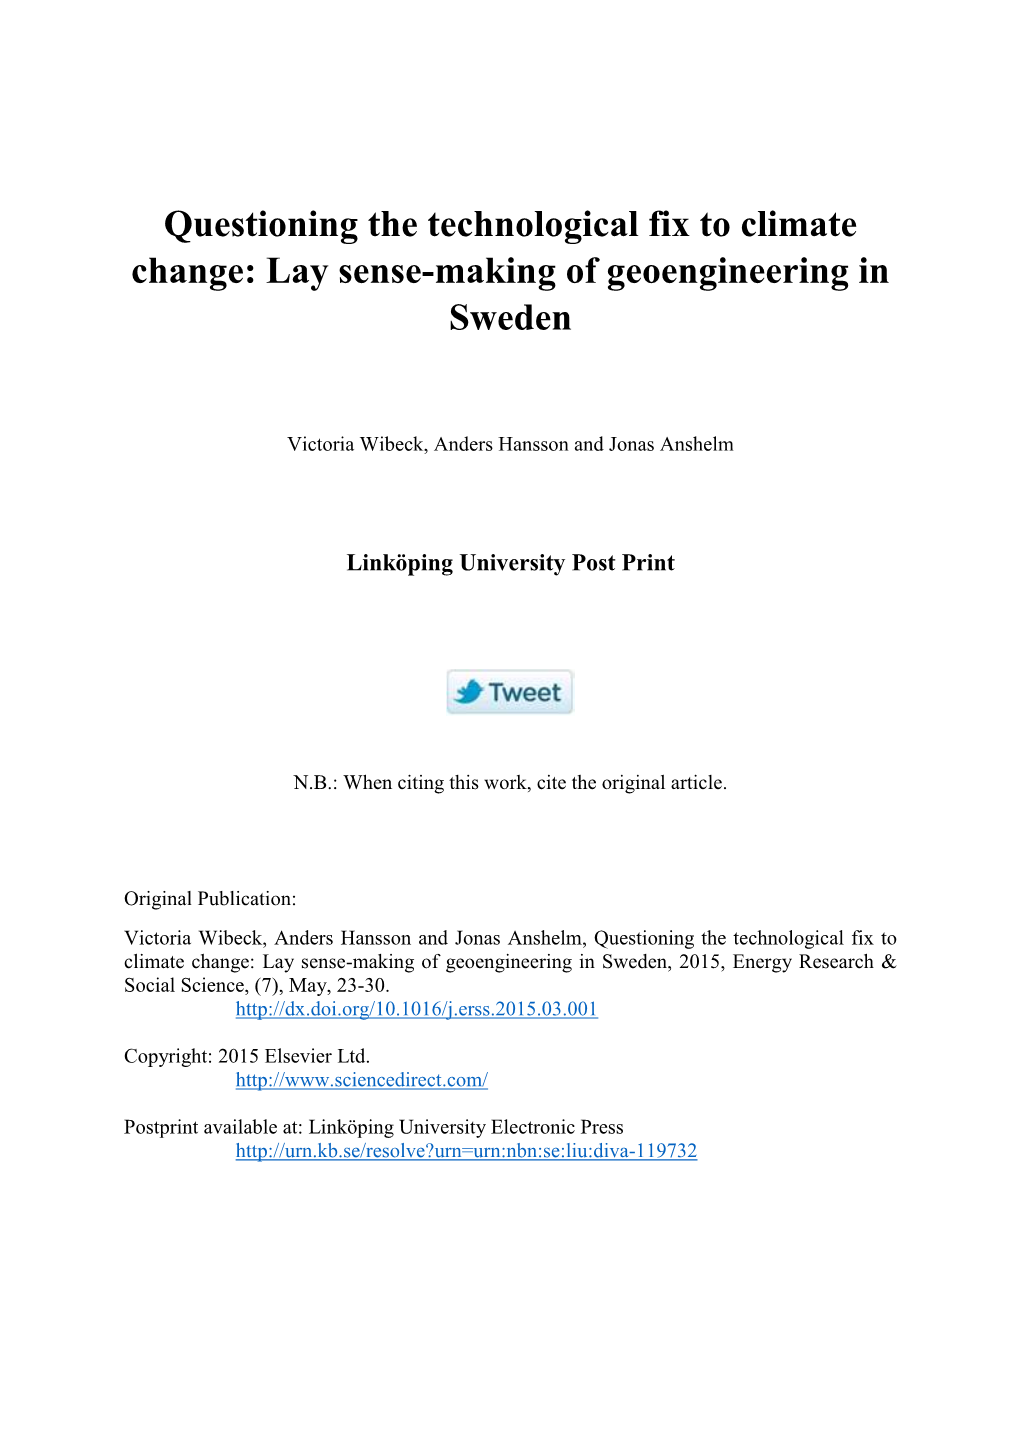 Questioning the Technological Fix to Climate Change: Lay Sense-Making of Geoengineering in Sweden